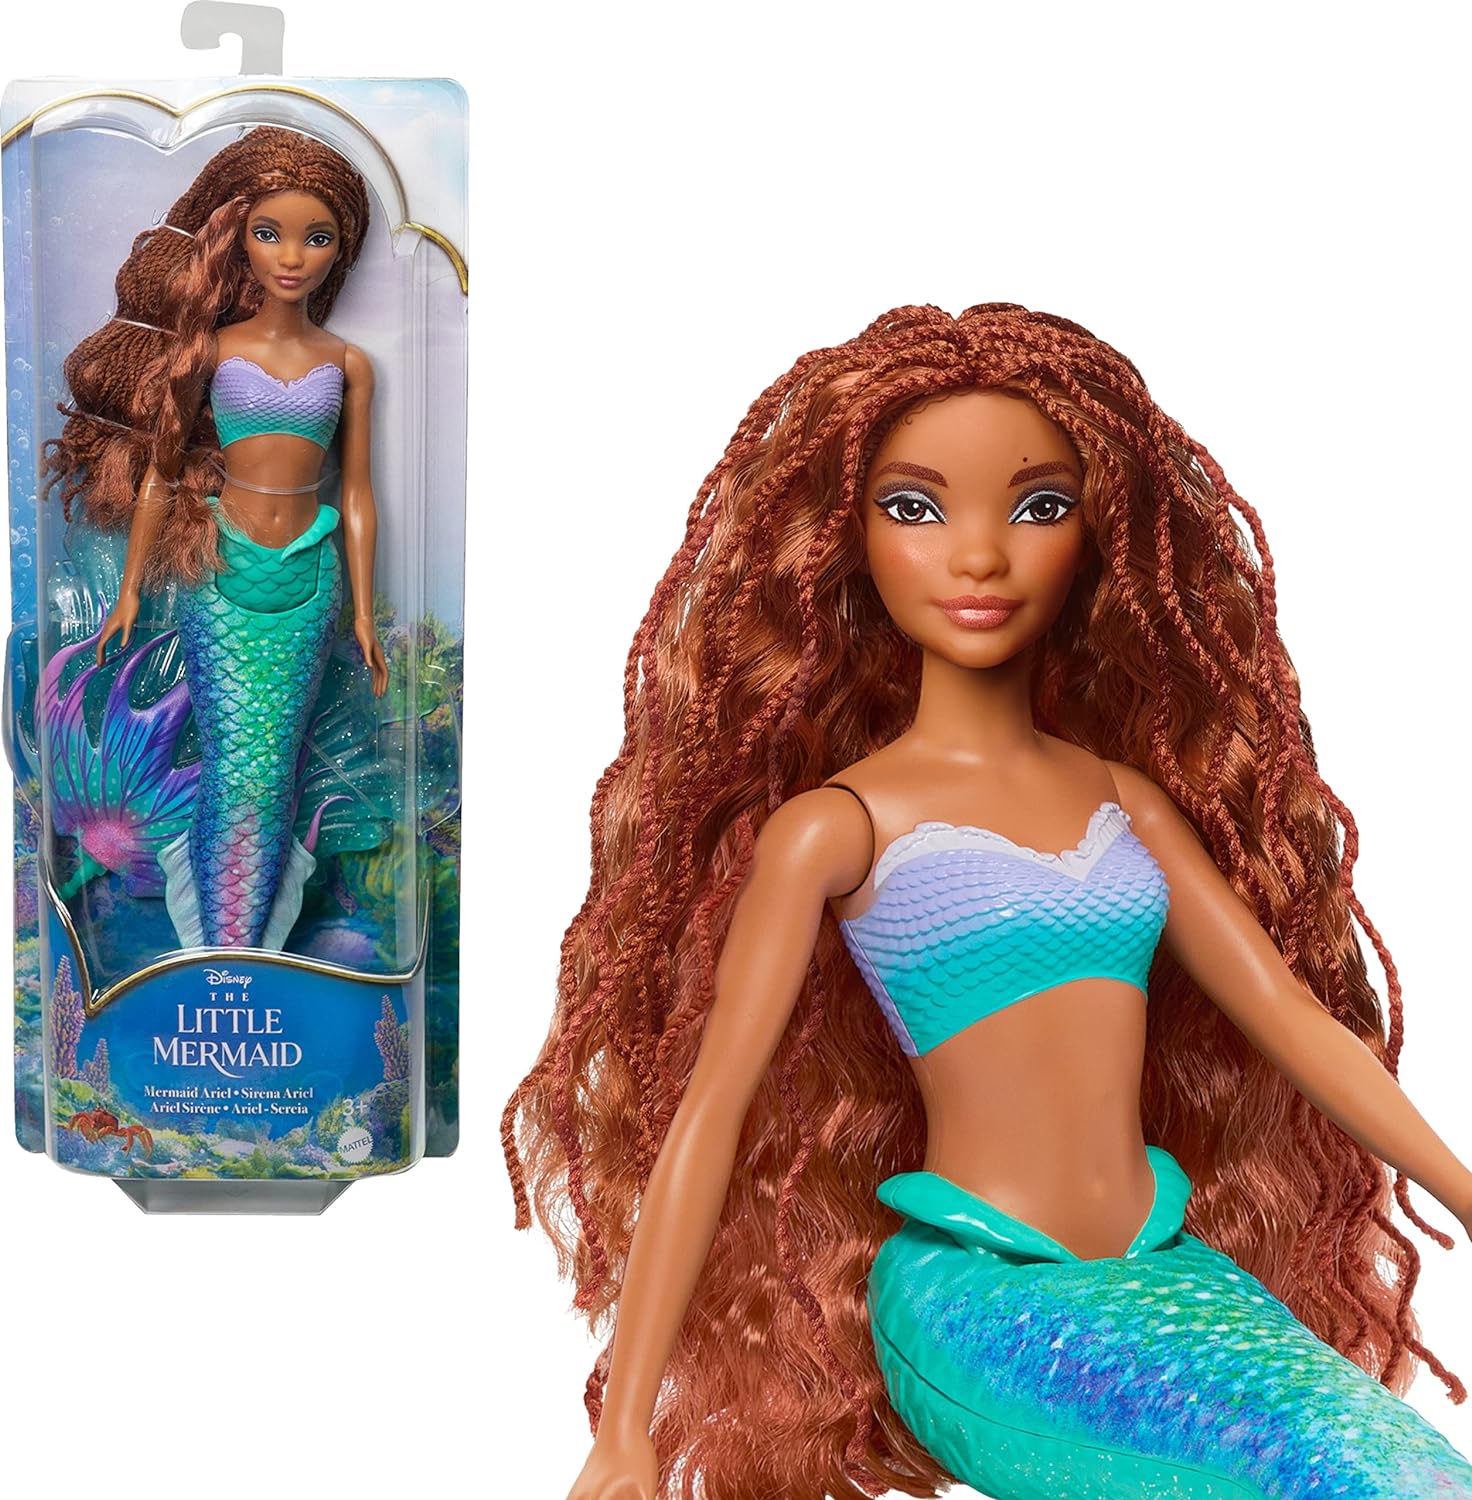 Mattel Disney the Little Mermaid Ariel Doll, Mermaid Fashion Doll with Signature Outfit, Toys Inspired by Disney's the Little Mermaid